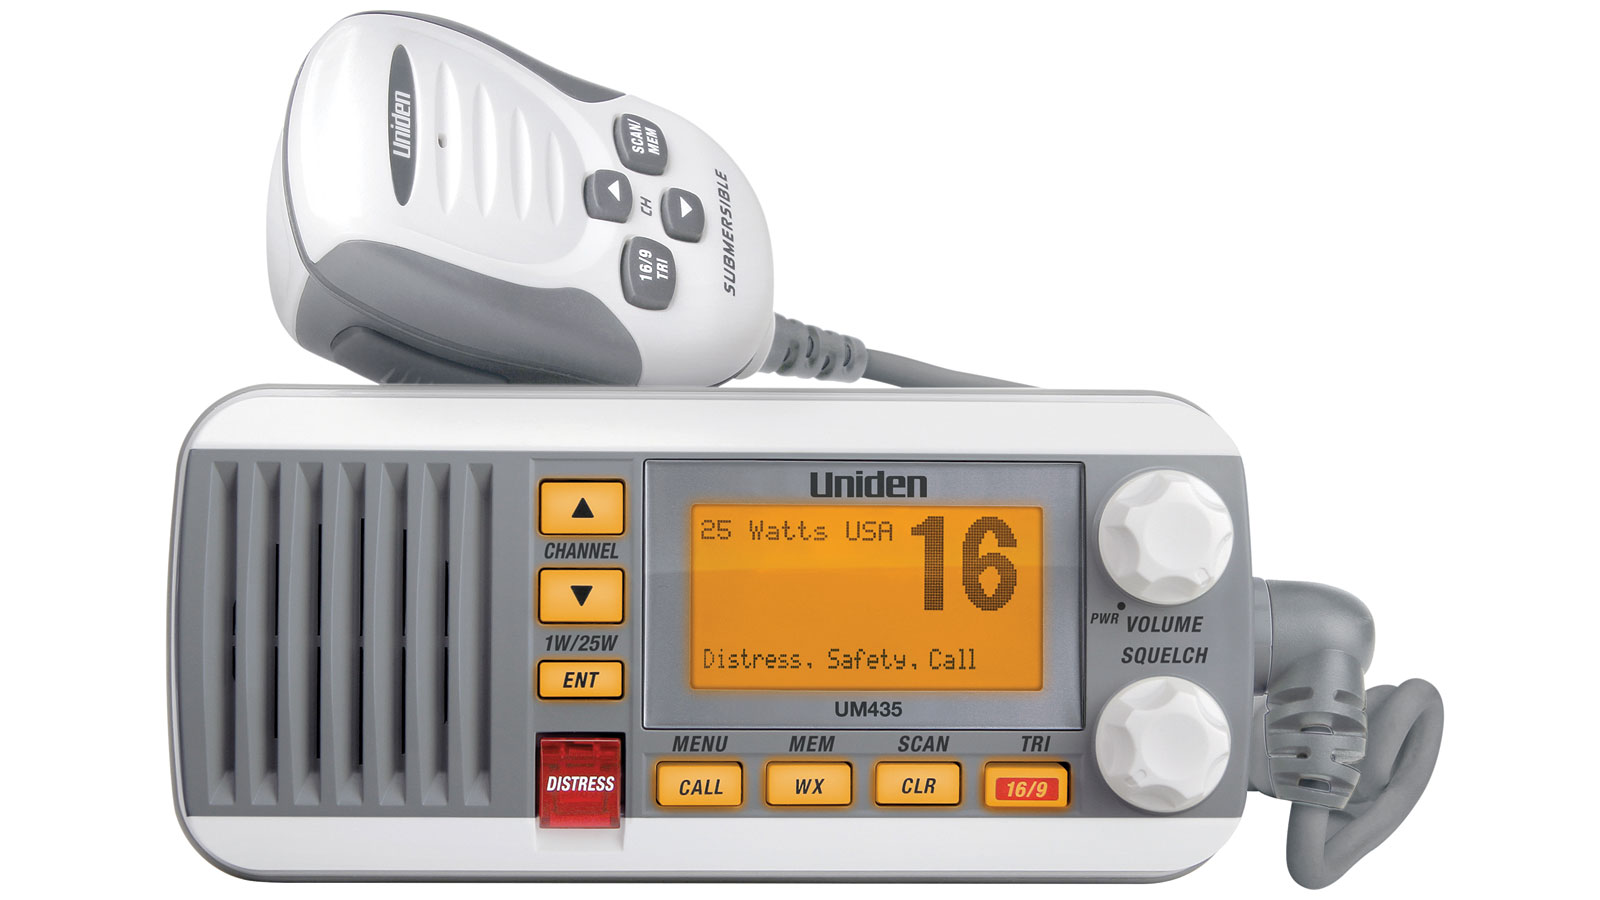 Uniden UM435 Fixed Mount VHF Radio w/ channel controls on microphone